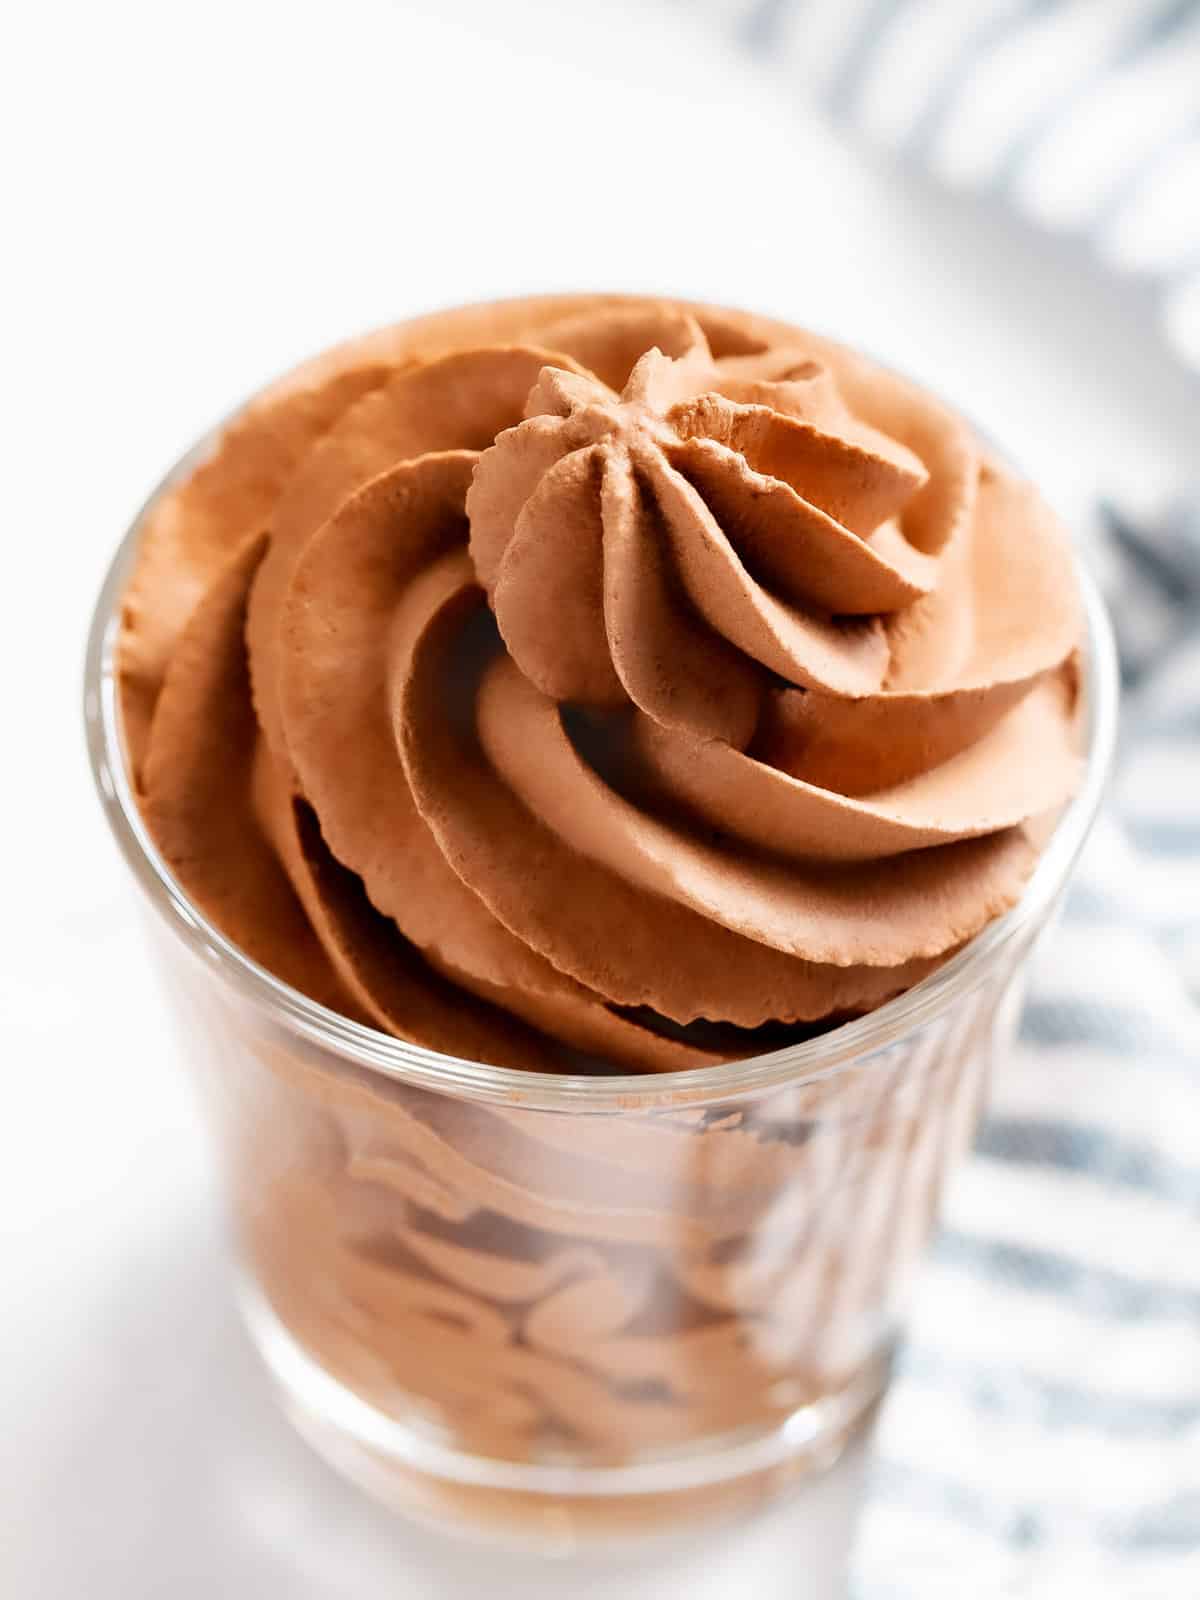 Chocolate whipped cream in a glass cup.